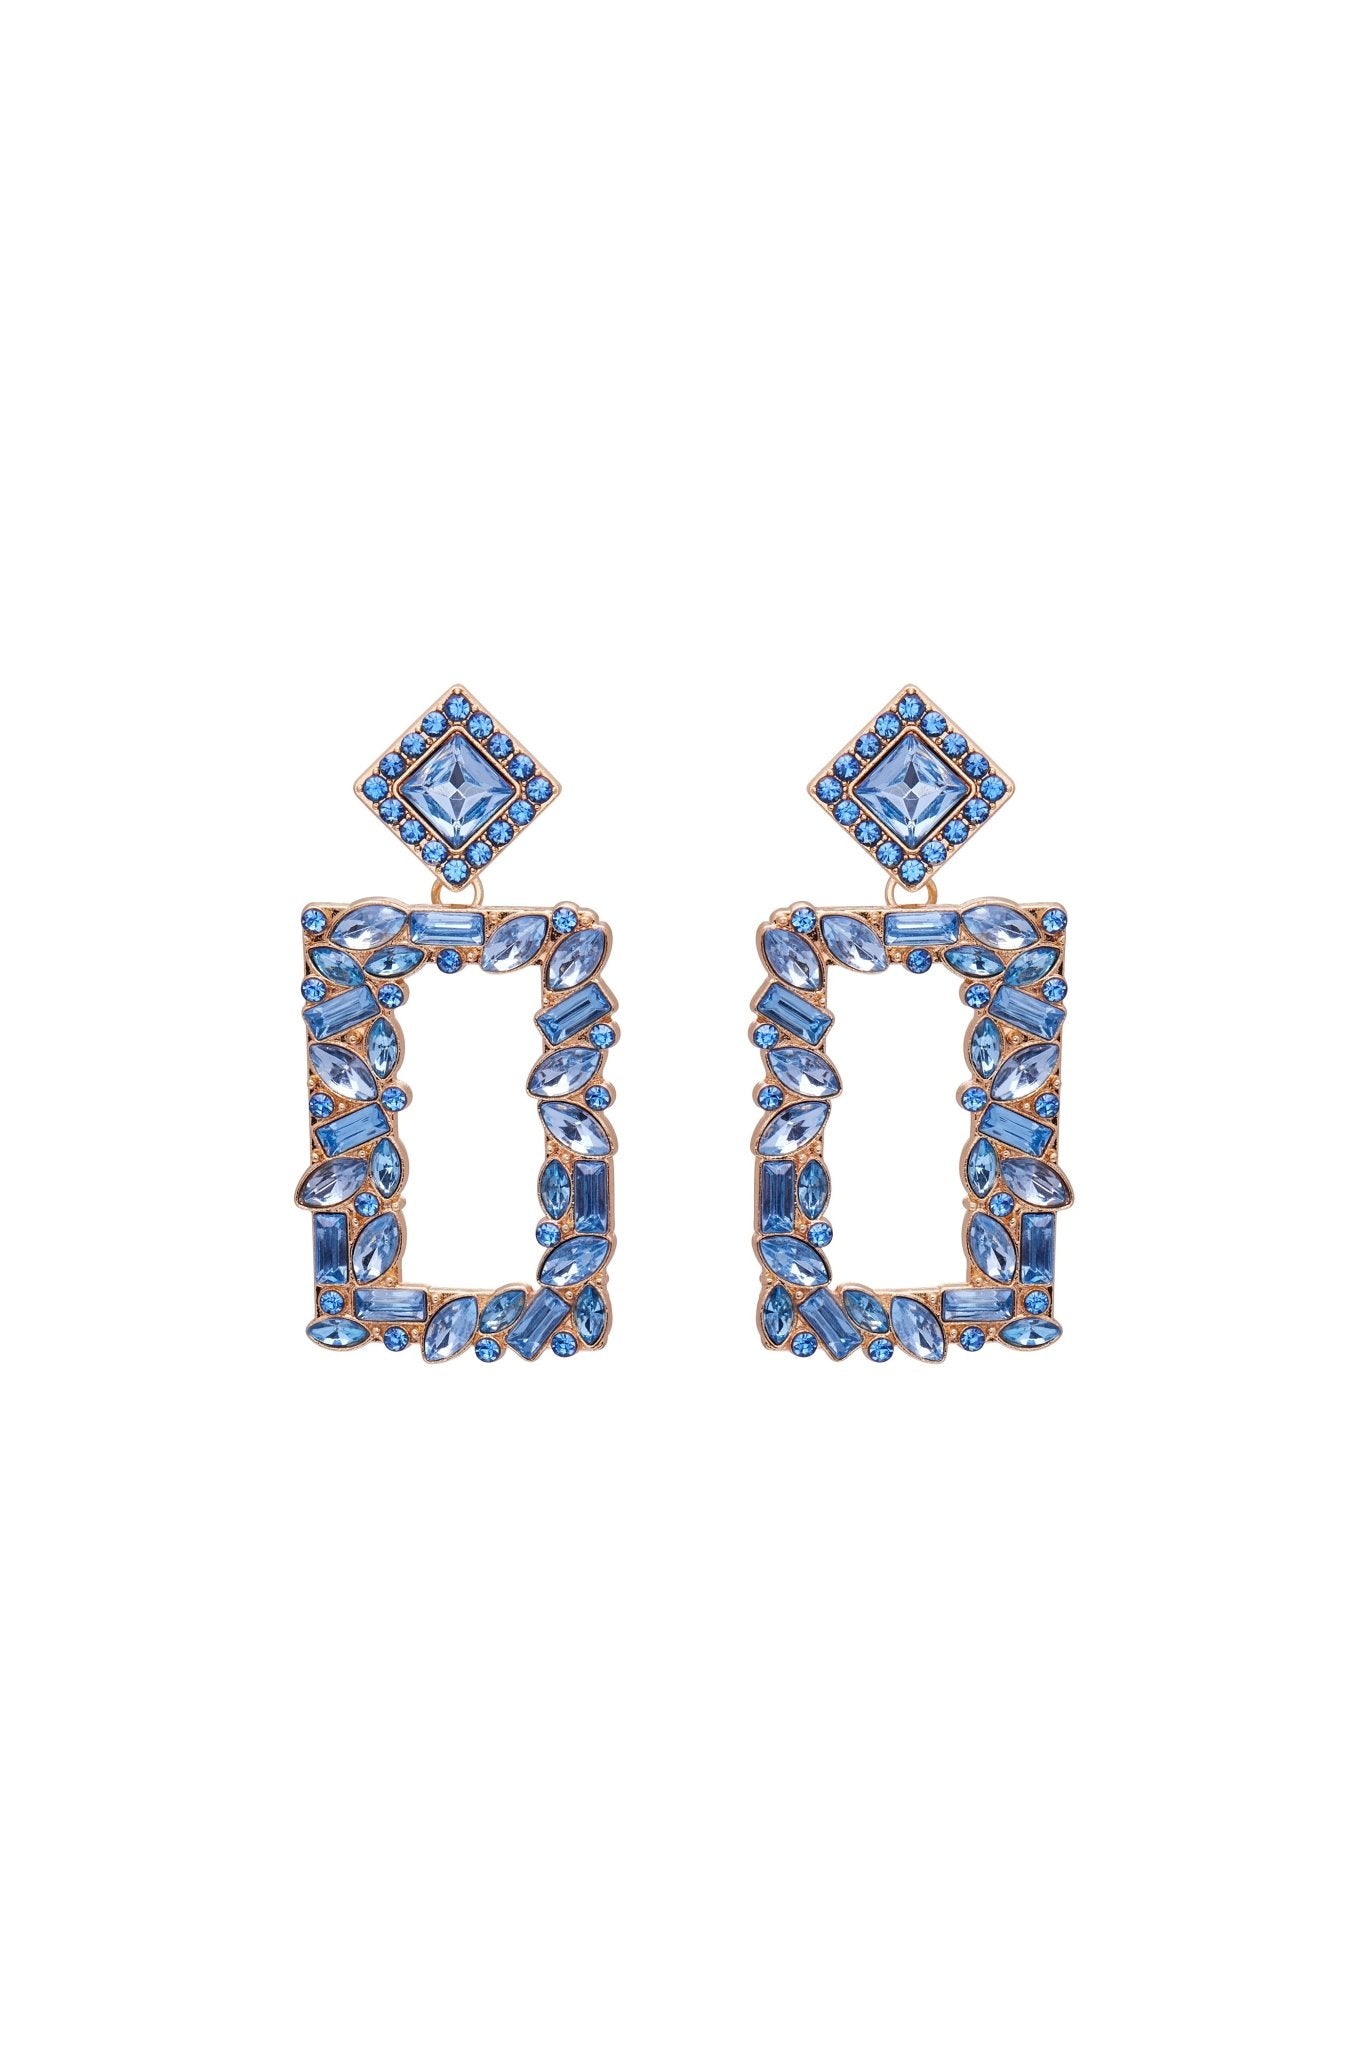 Tri Dangle Earrings - YG COLLECTION